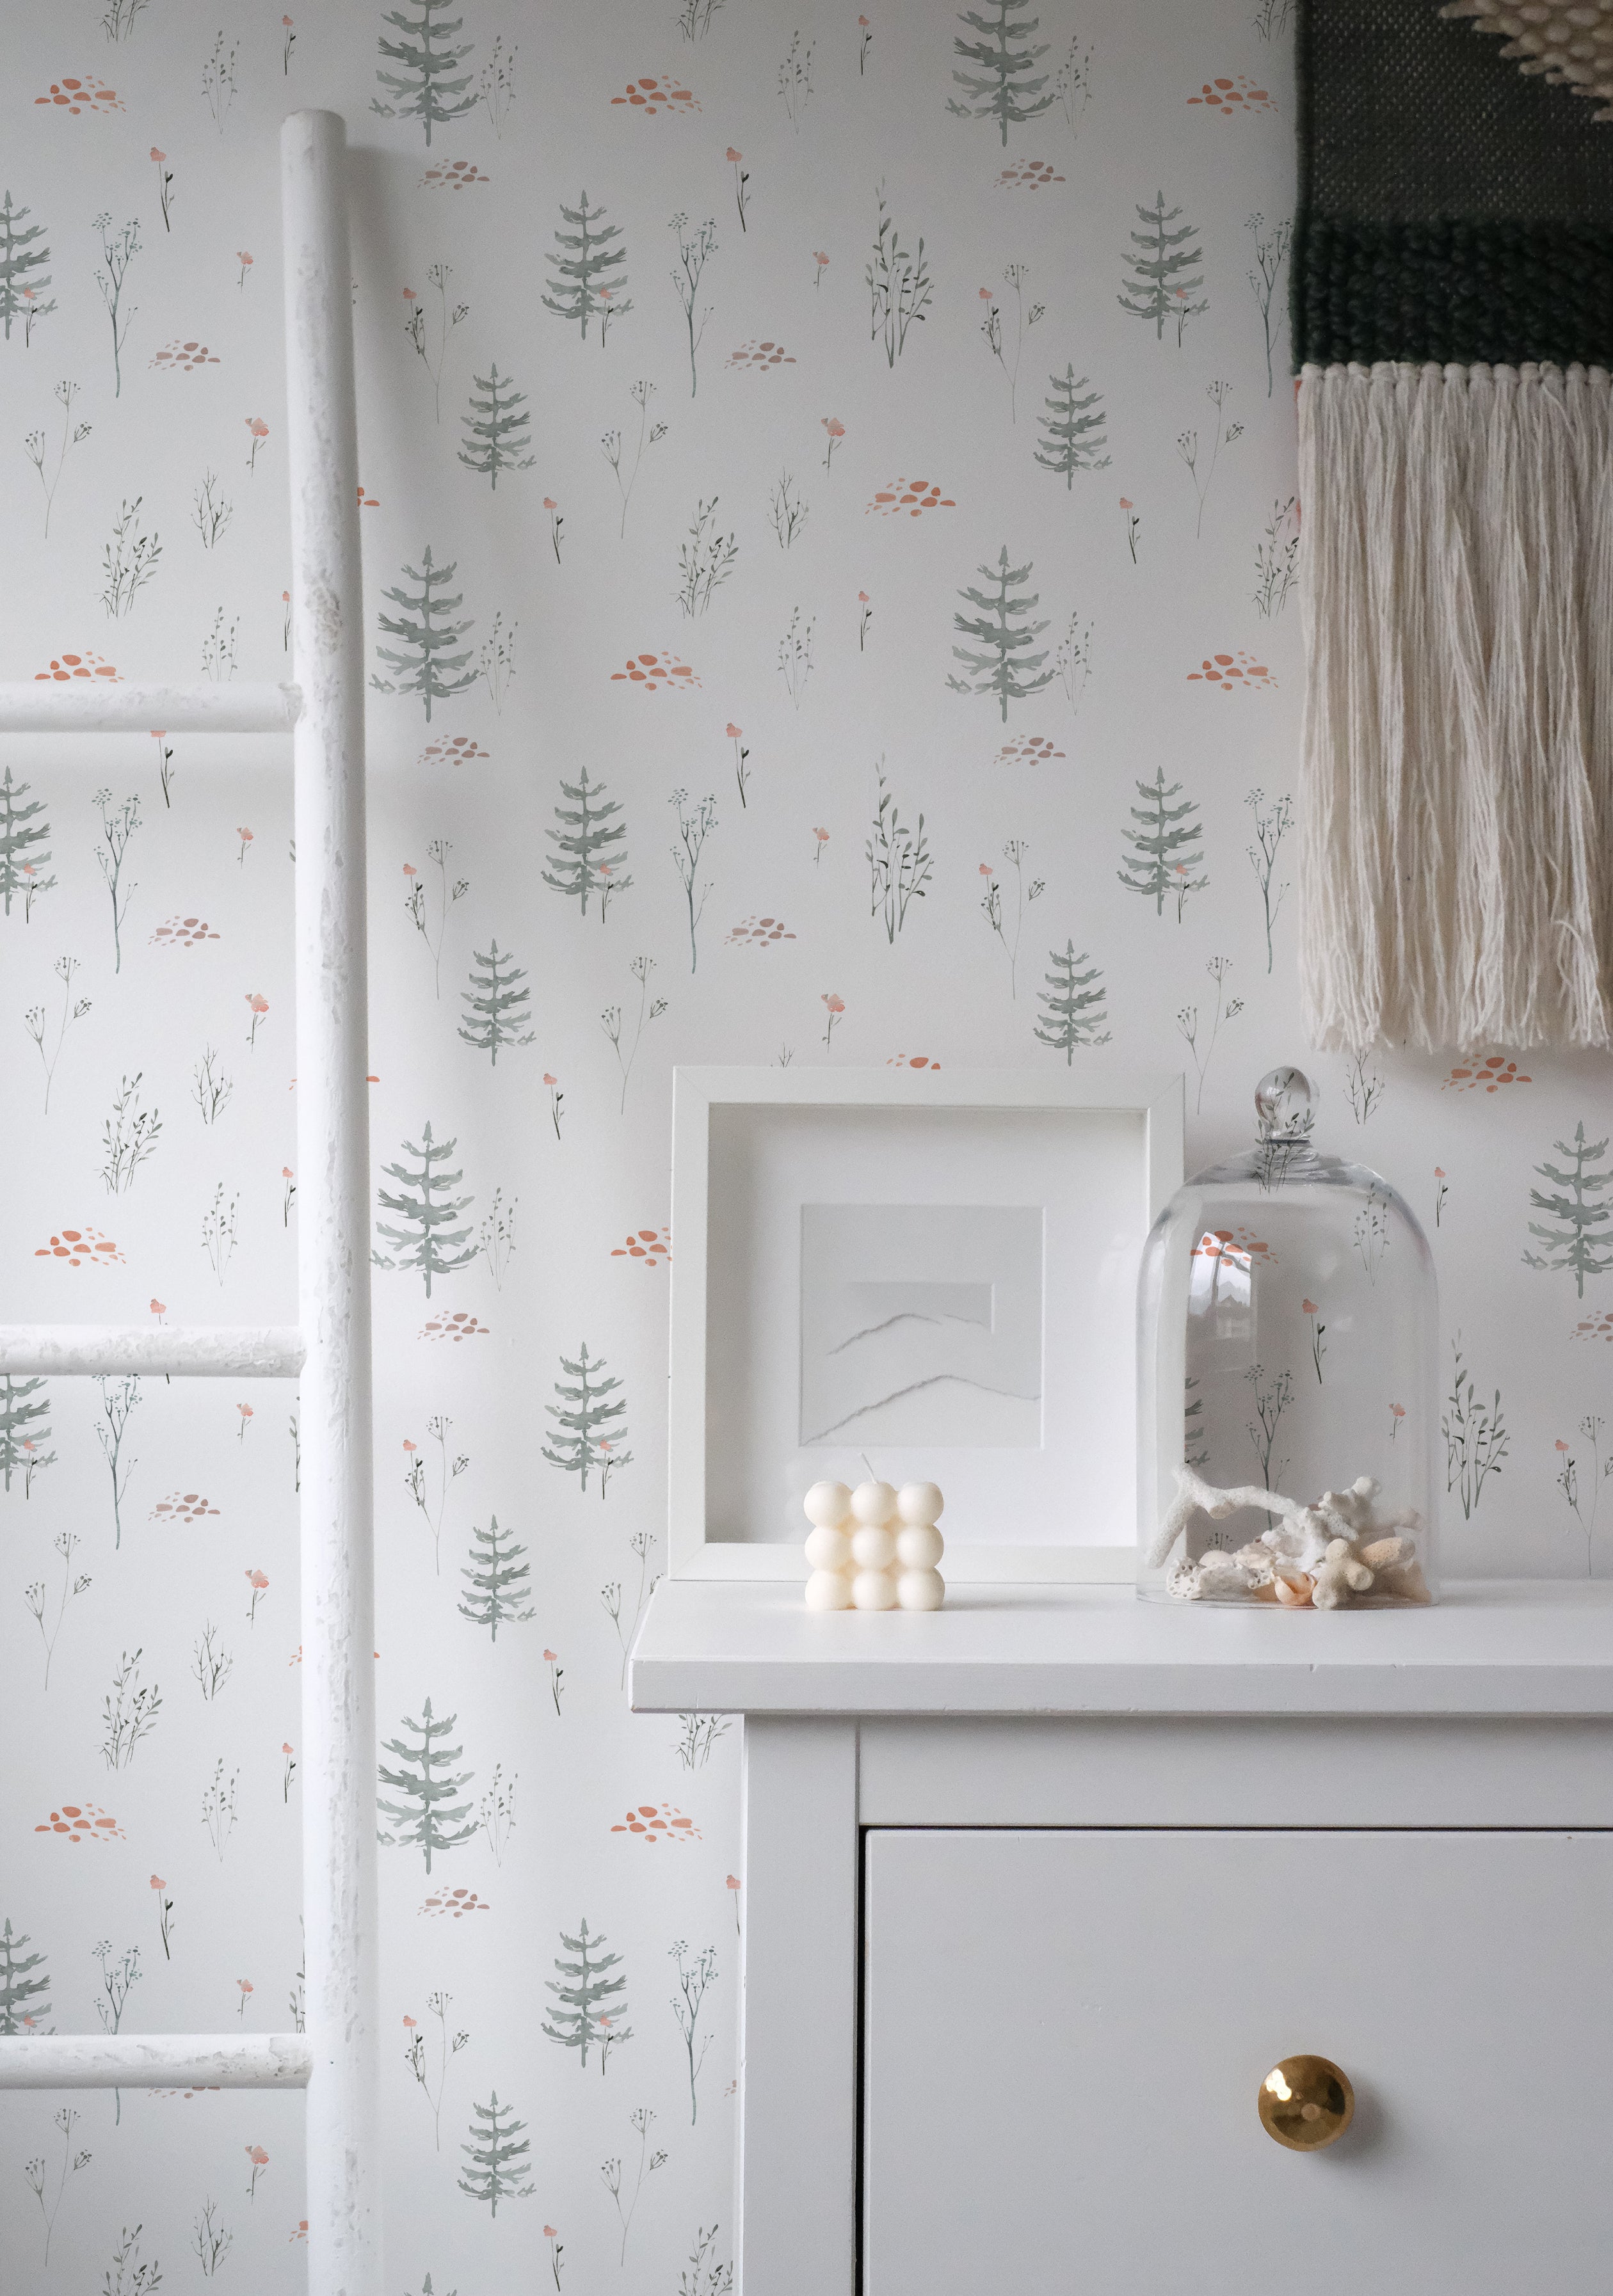 A styled corner of a room showcasing the Pine Tree Wallpaper. The wall is adorned with soft gray pine trees and small foliage, complemented by a white fireplace mantel displaying a minimalist art frame and a decorative glass cloche containing sea shells.